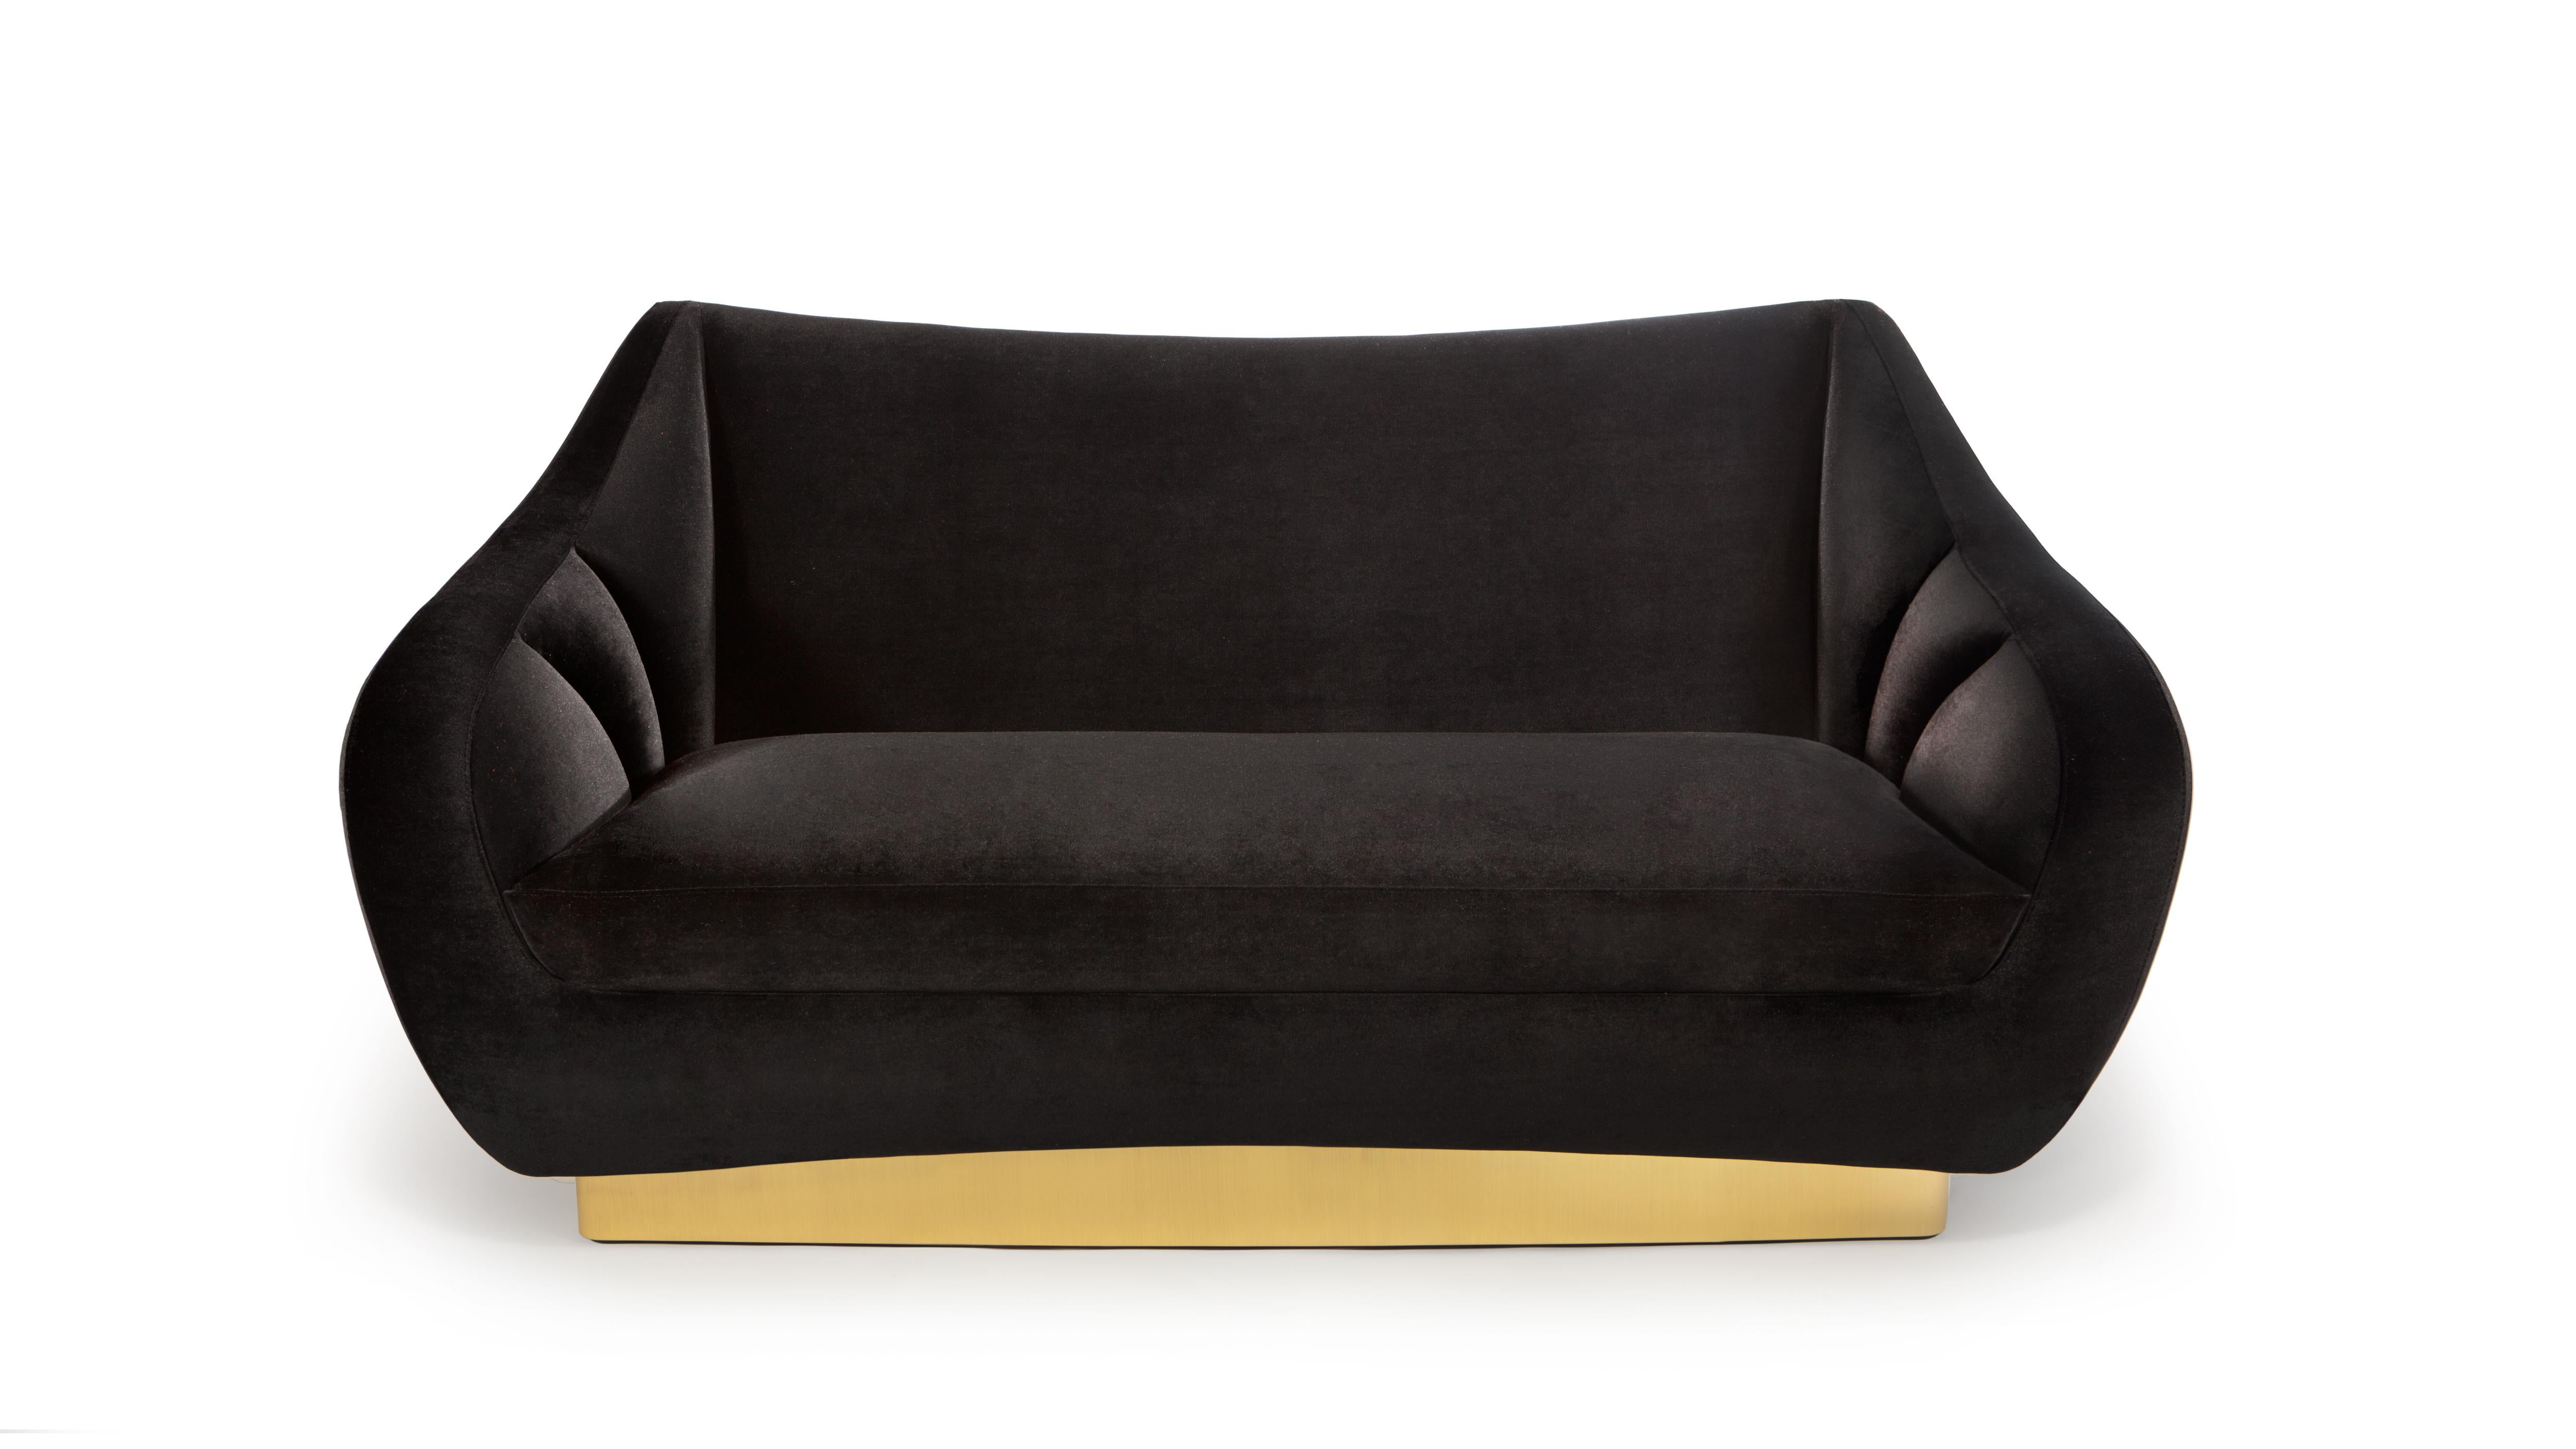 Figueroa 2 Seat Sofa by InsidherLand
Dimensions: D 90 x W 180 x H 90 cm.
Materials: Brushed brass, InsidherLand Bright Velvet Ref. Onyx fabric.
70 kg.
Available in different fabrics.

Evoking the Californian mountain, Figueroa sofa has the same